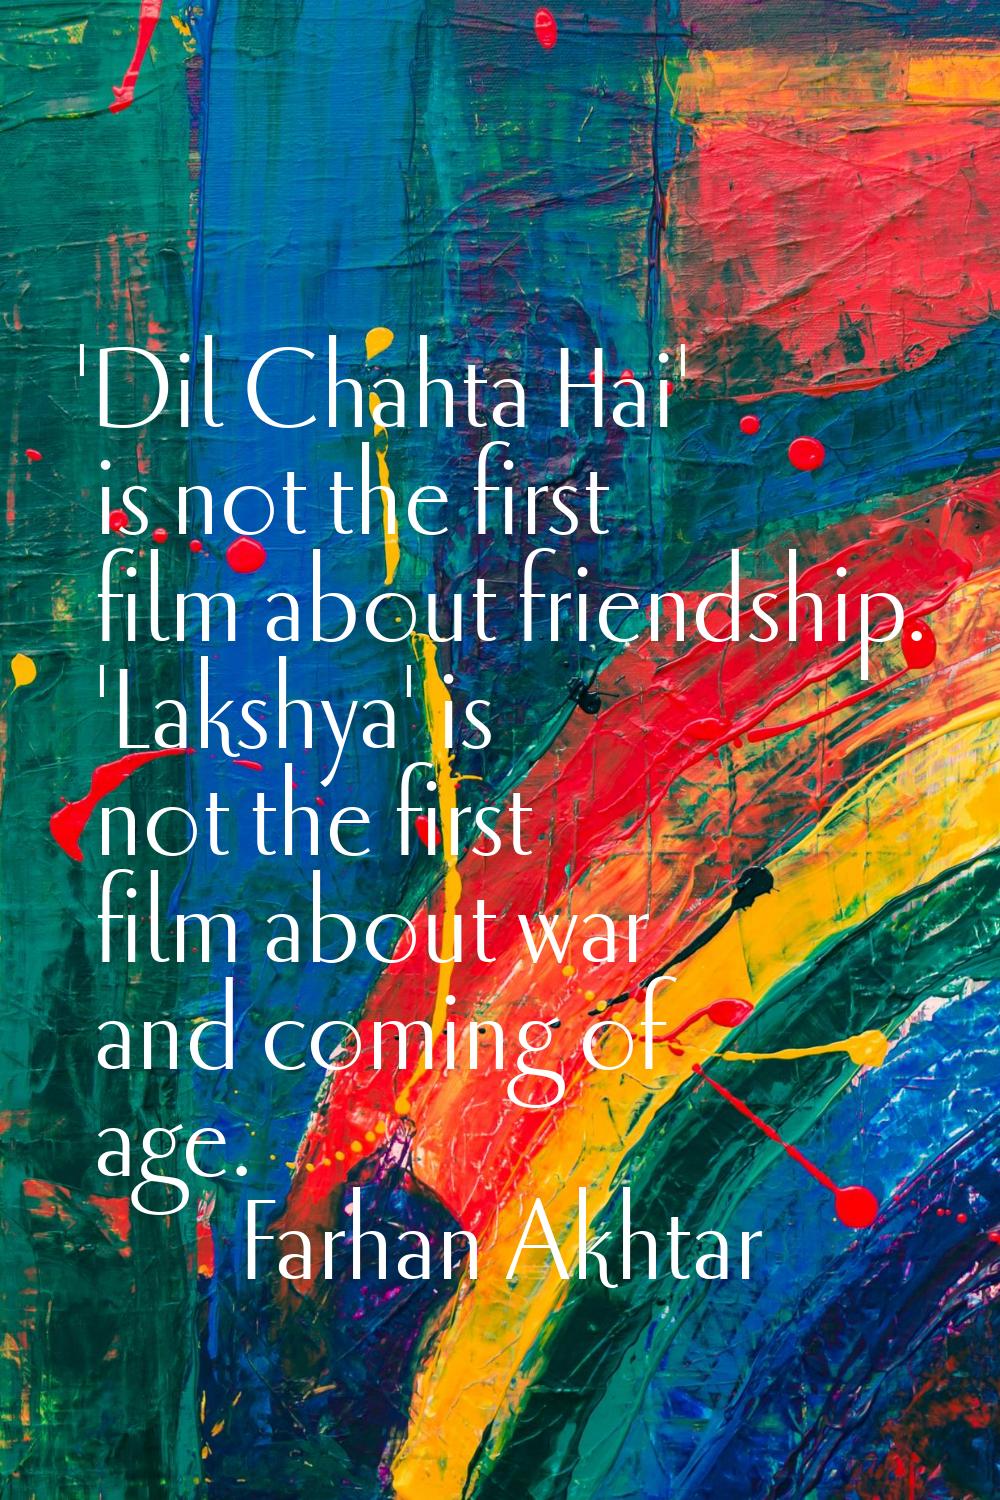 'Dil Chahta Hai' is not the first film about friendship. 'Lakshya' is not the first film about war 